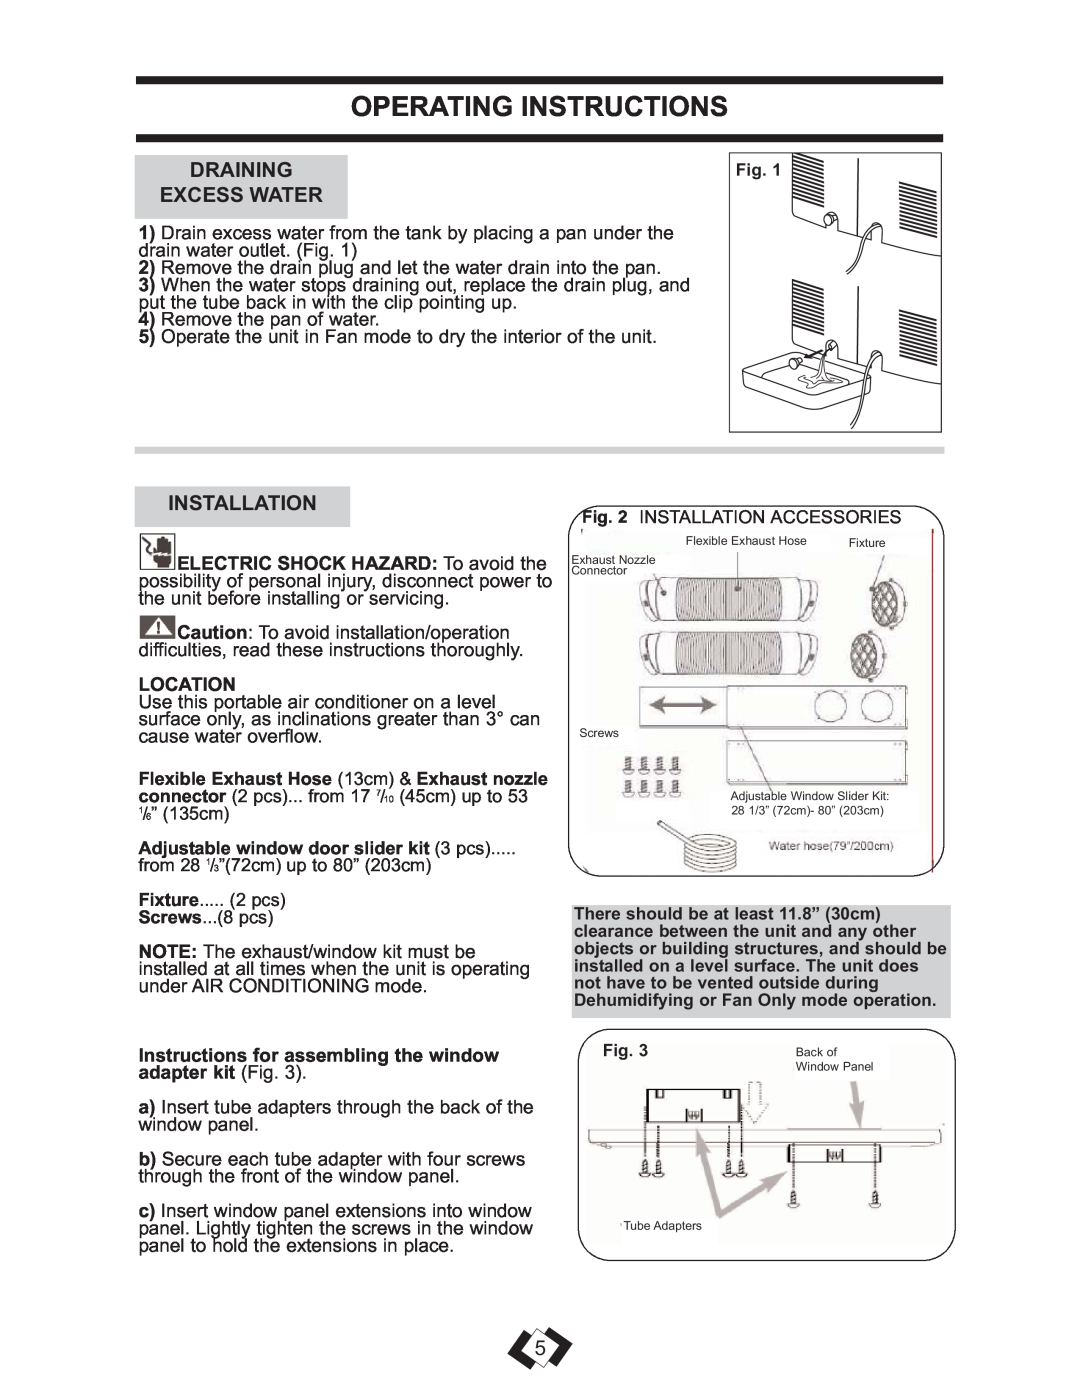 Danby DPAC 13009 operating instructions Operating Instructions, Draining Excess Water, Installation, Location 